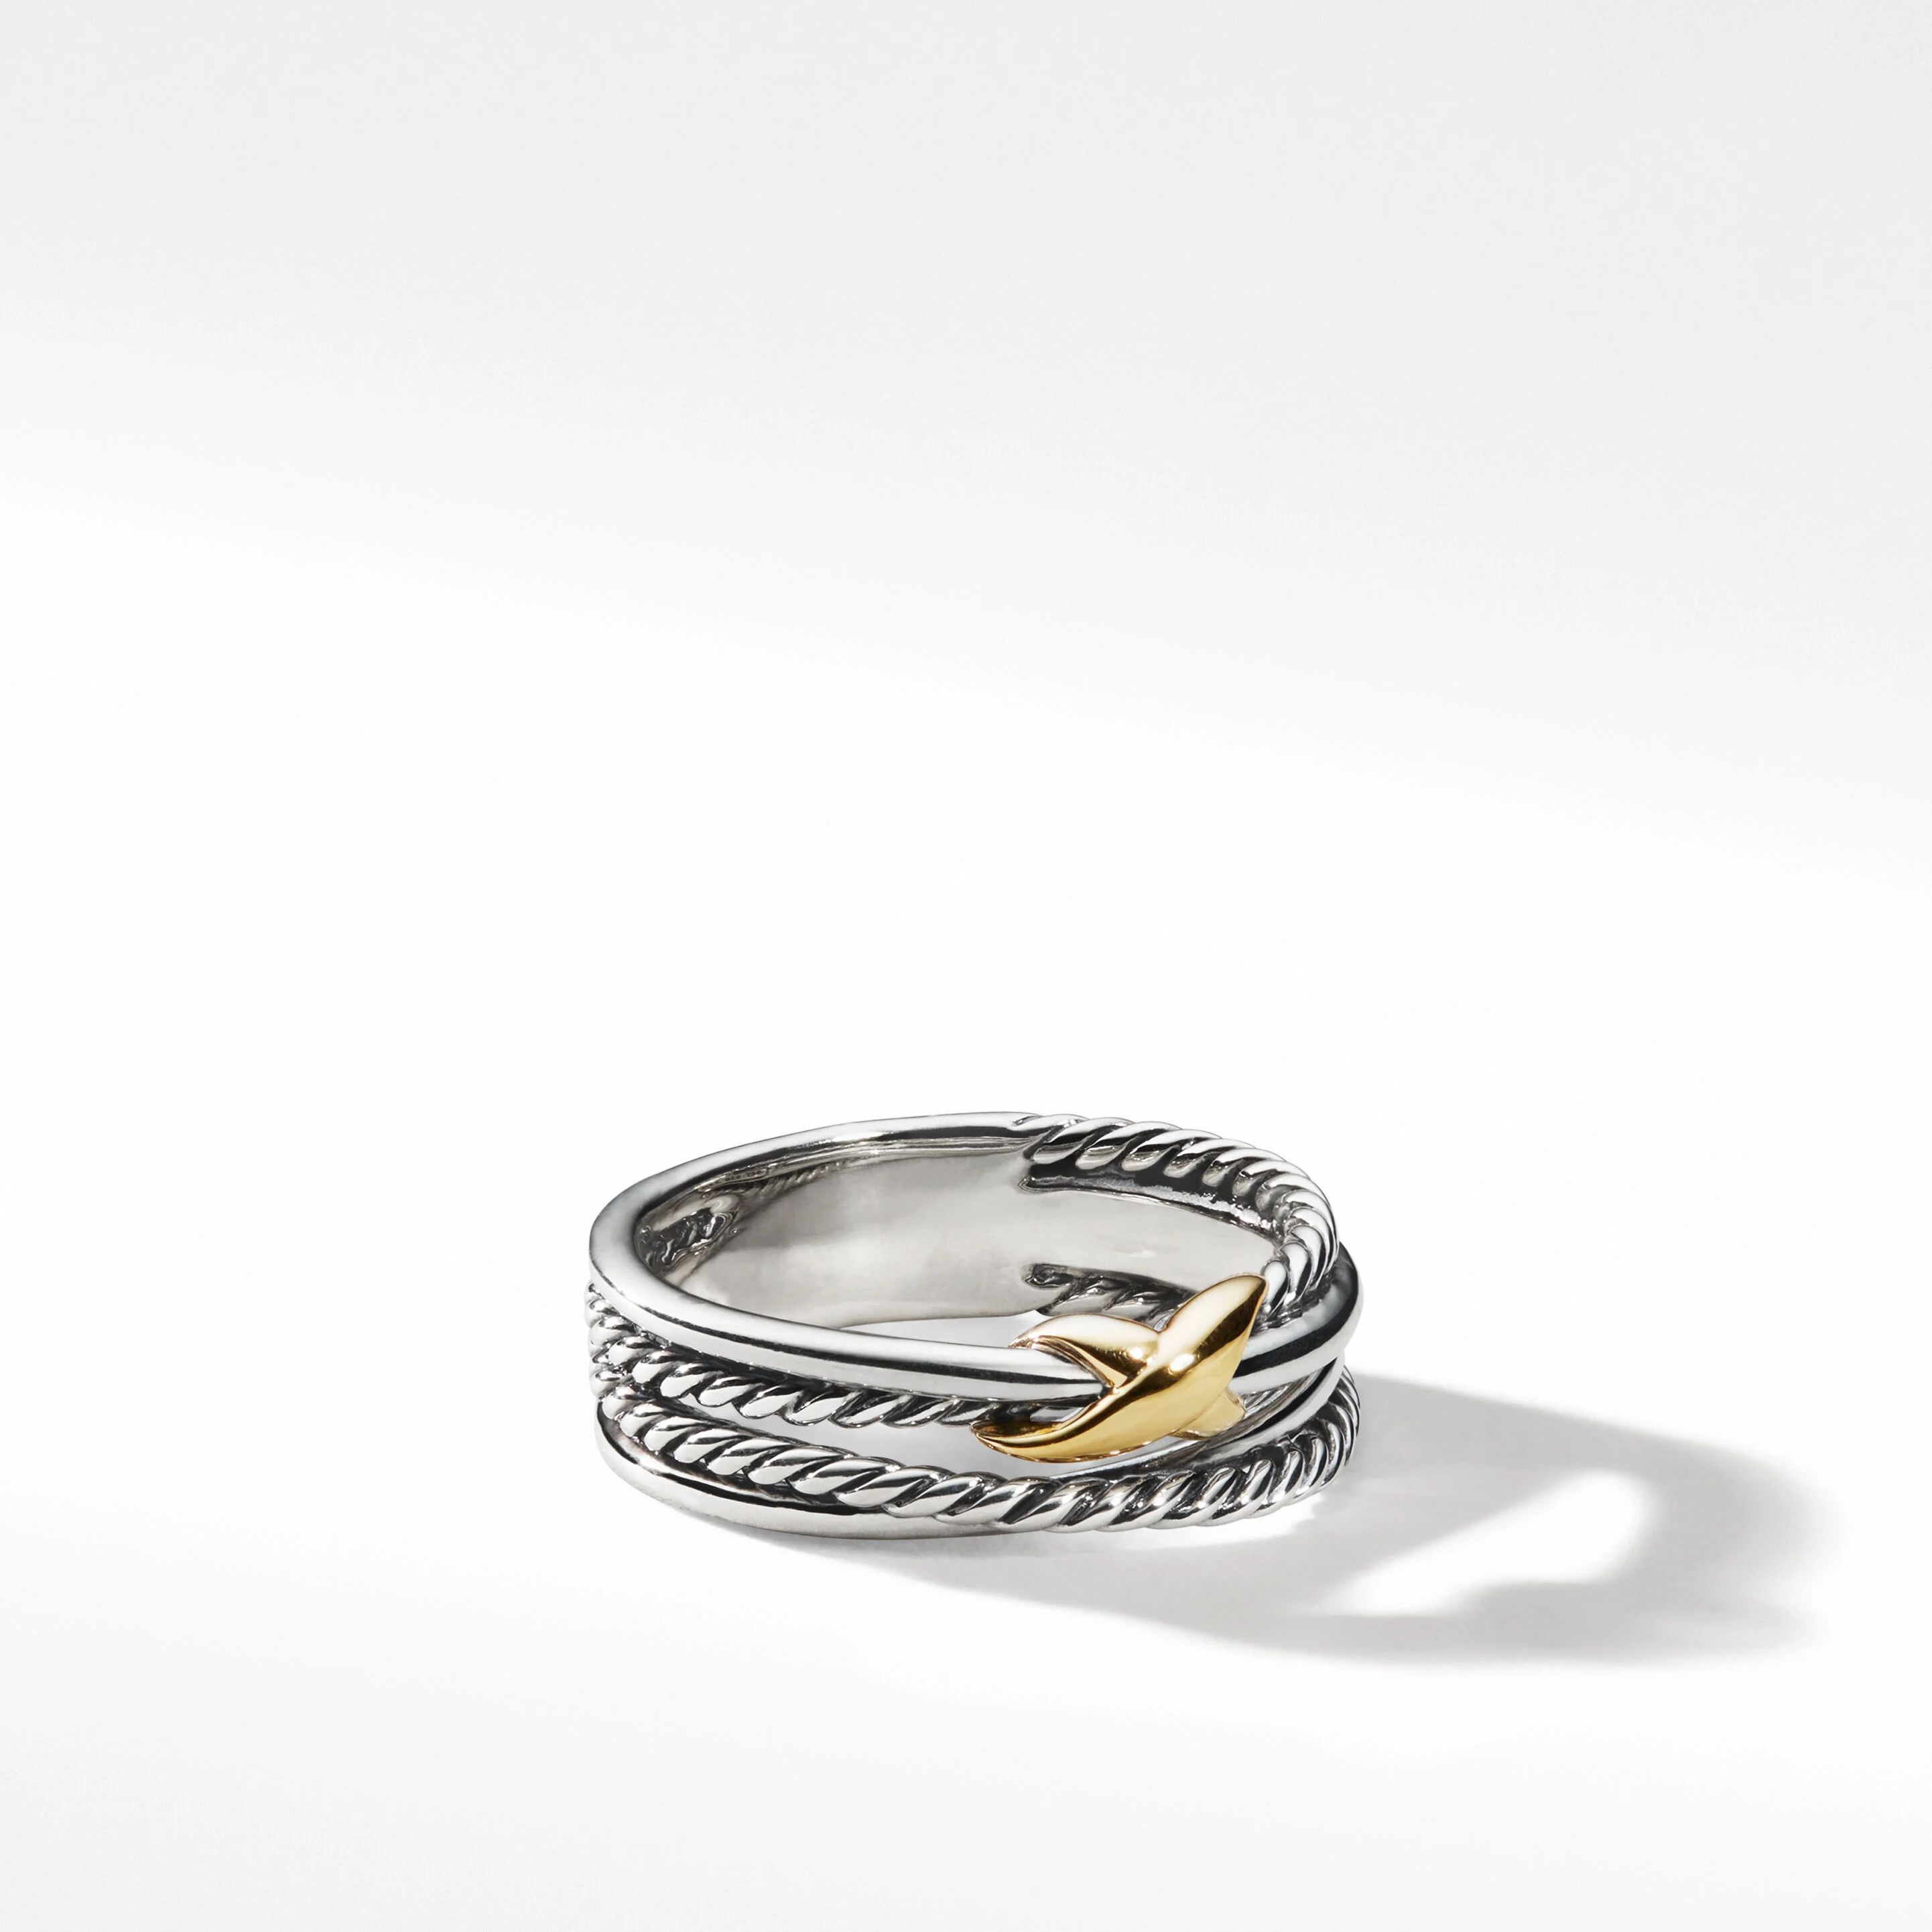 X Crossover Band Ring in Sterling Silver with 18K Yellow Gold | David Yurman